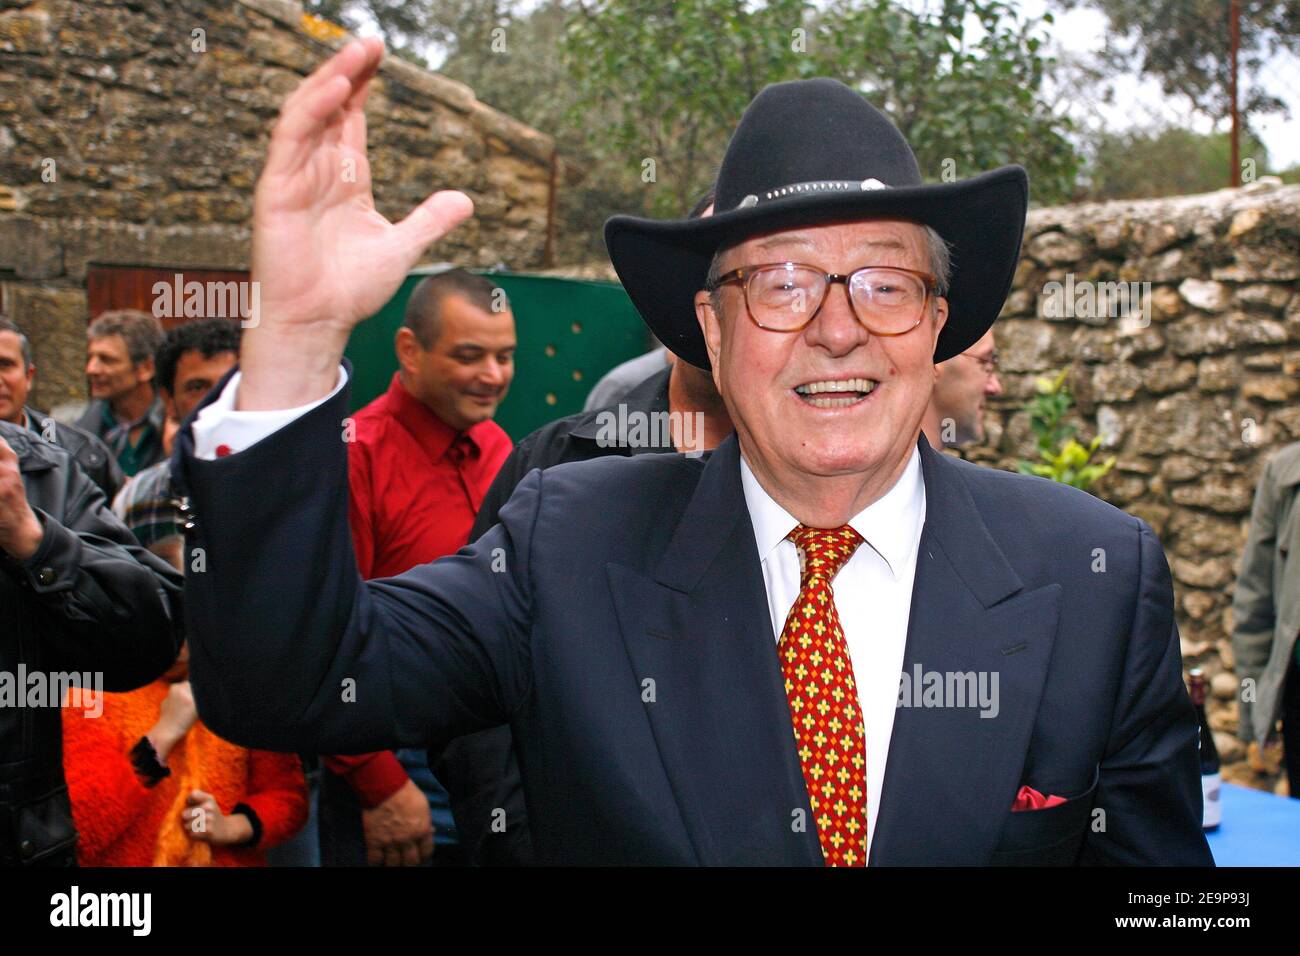 Jean-Marie Le Pen and Jean-Claude Martinez meet a wine grower in  Richerenches in Vaucluse, France on November 15, 2006 to launch 'La Marche  Verte' dedicated to farmers and wine growers. Photo by